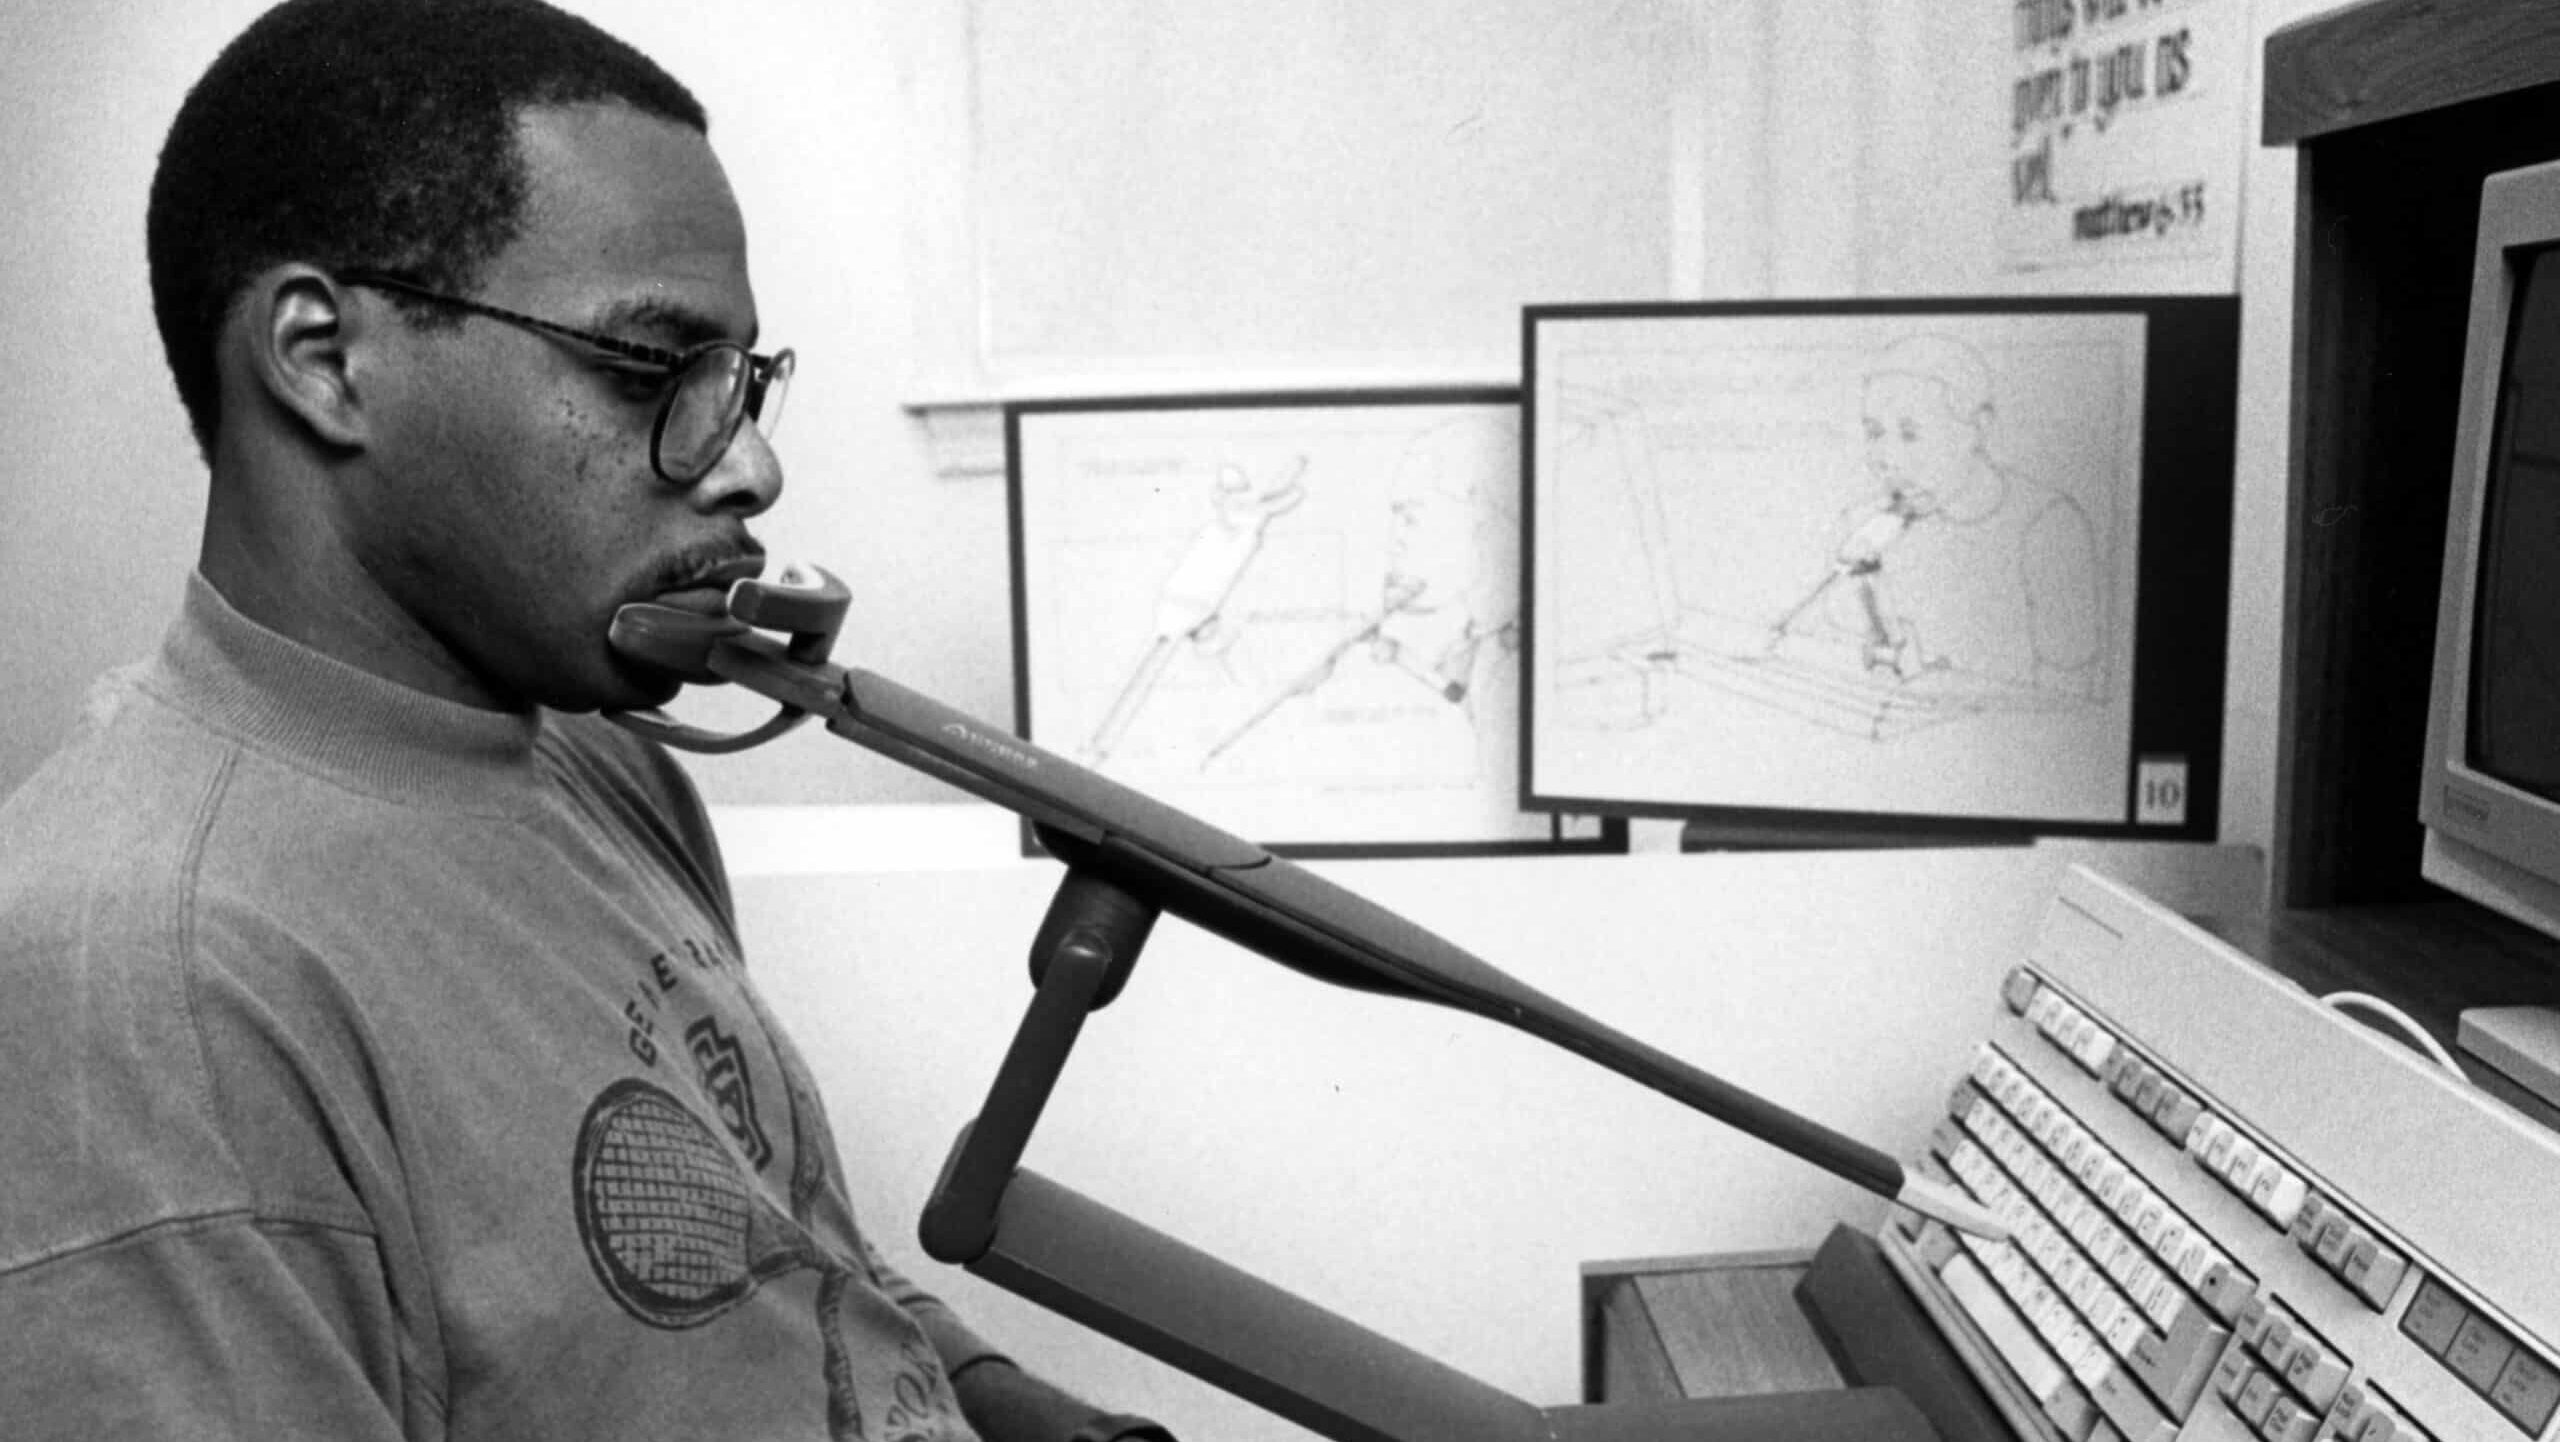 Graduate student Vincent L. Haley demonstrating his pointer device for computer accessibility, circa 1980 to 1989.